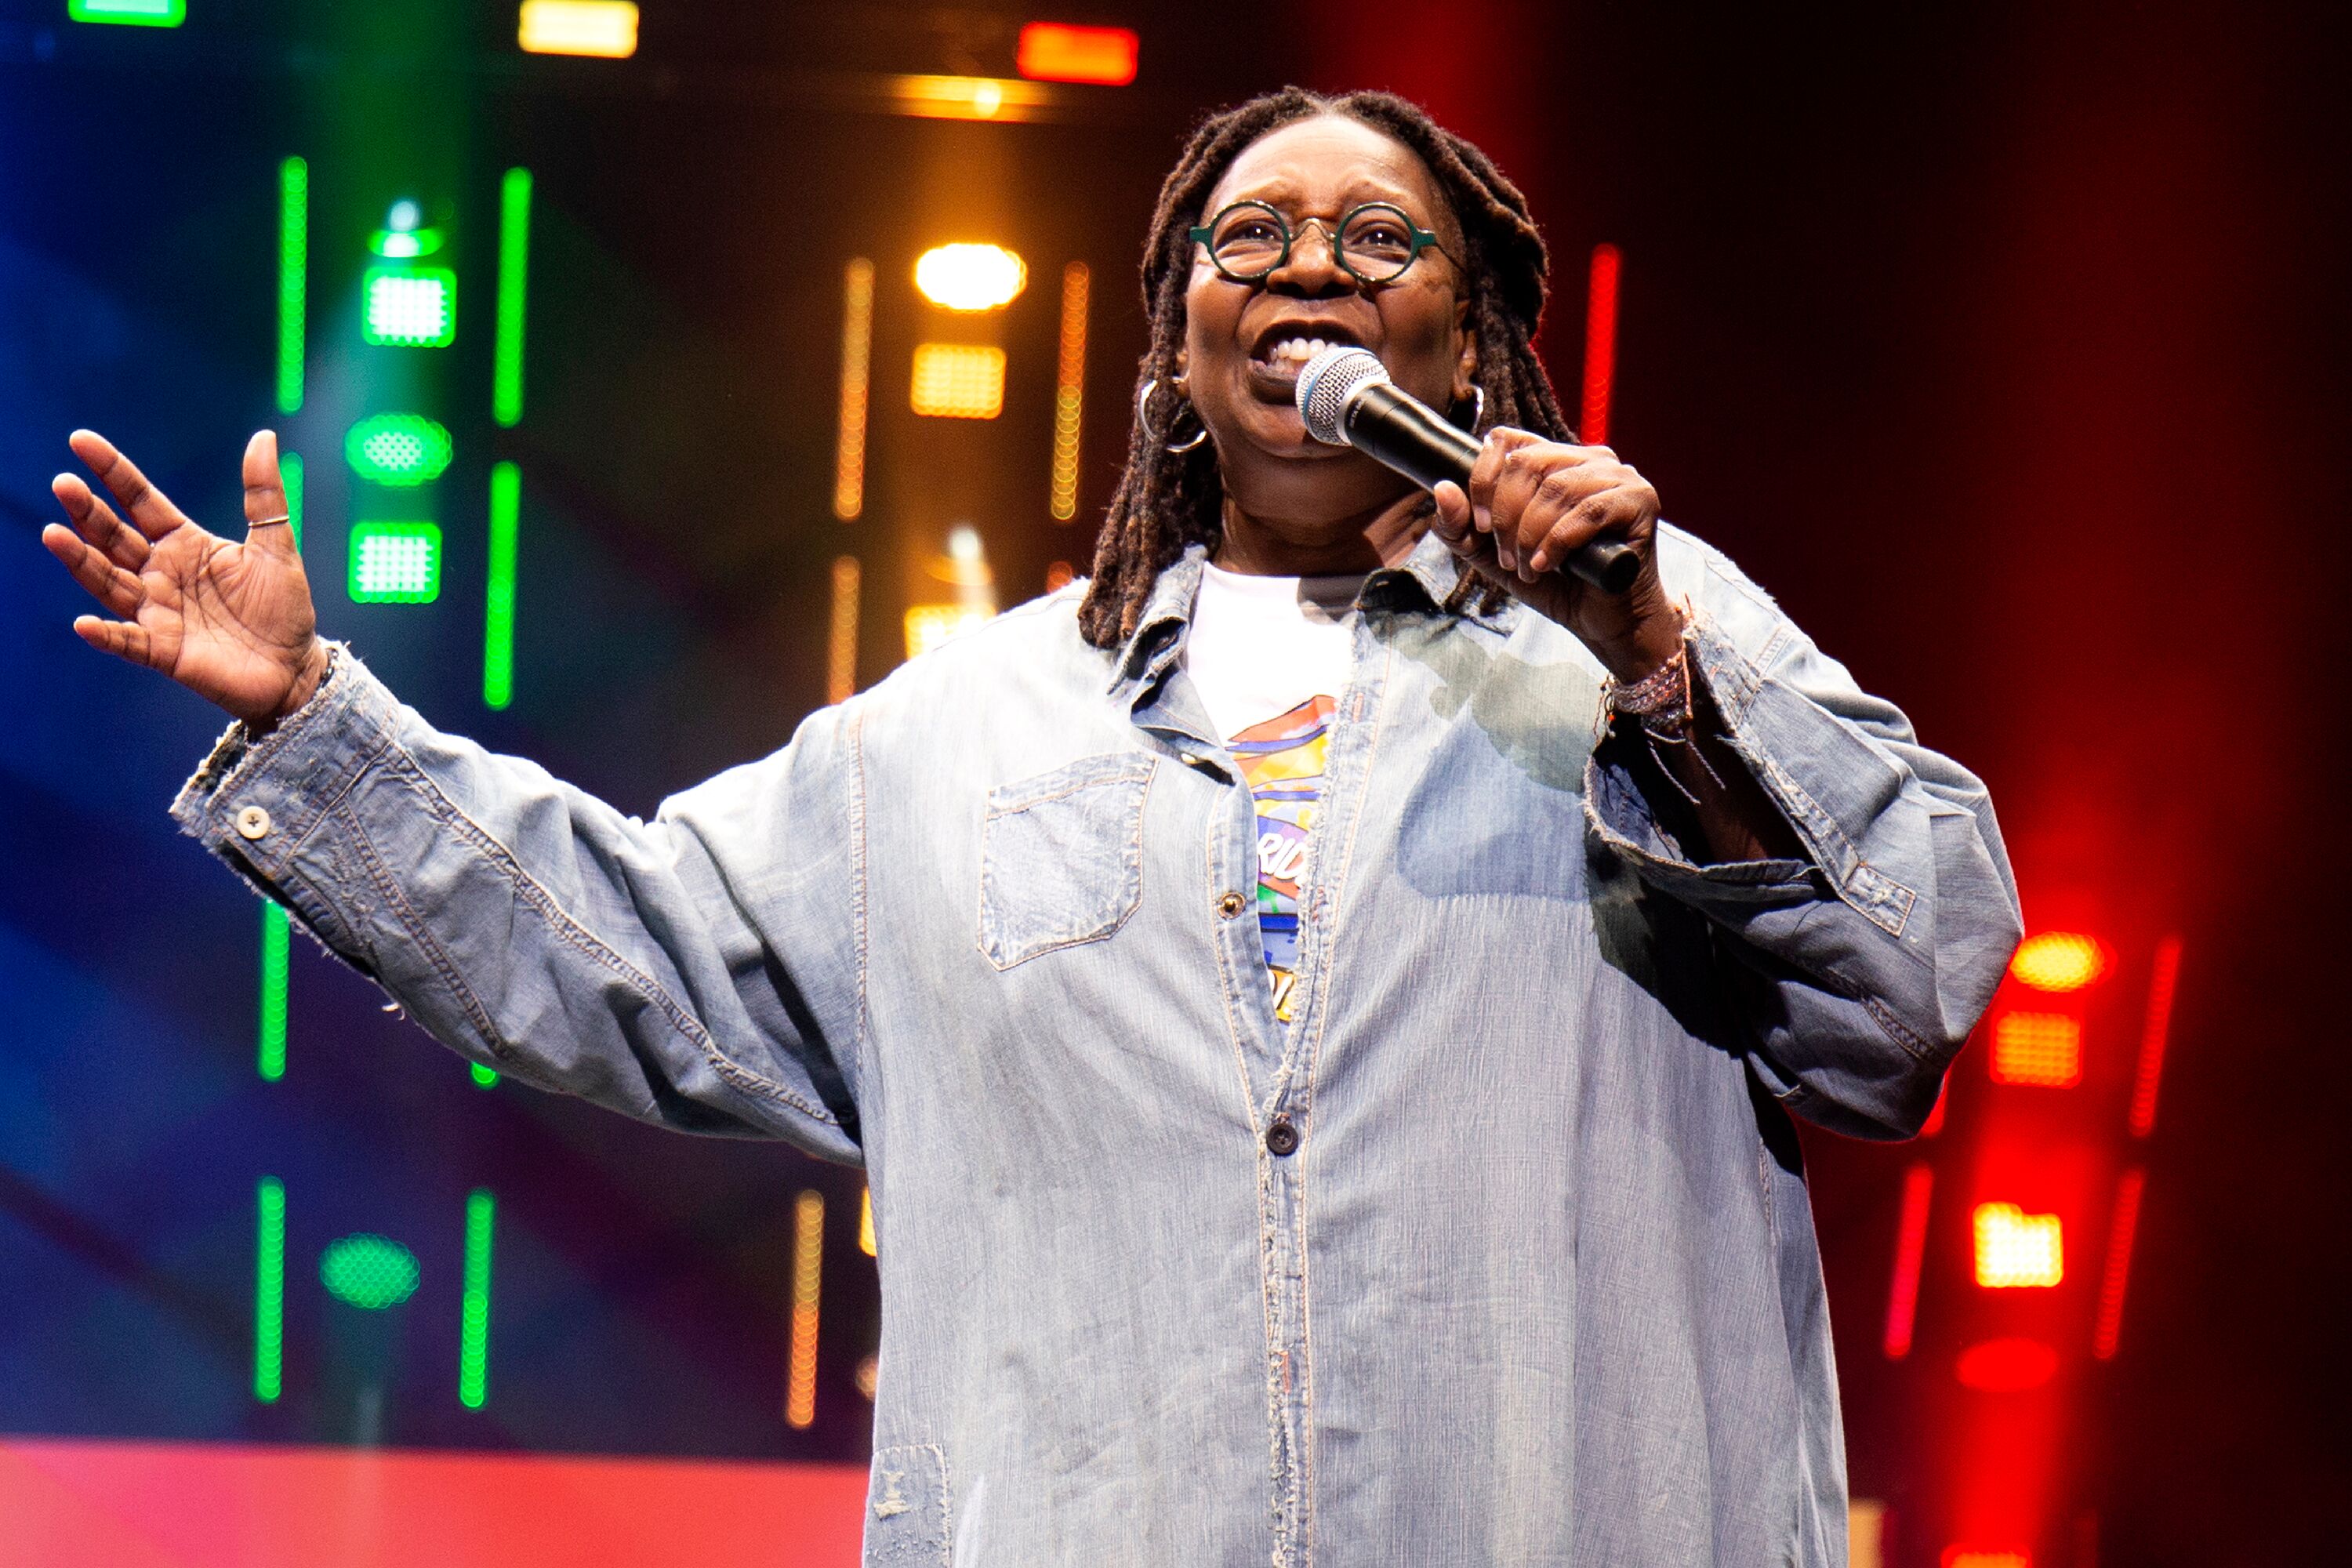 Whoopi Goldberg at one of her recent speaking engagements | Source: Getty Images/GlobalImagesUkraine